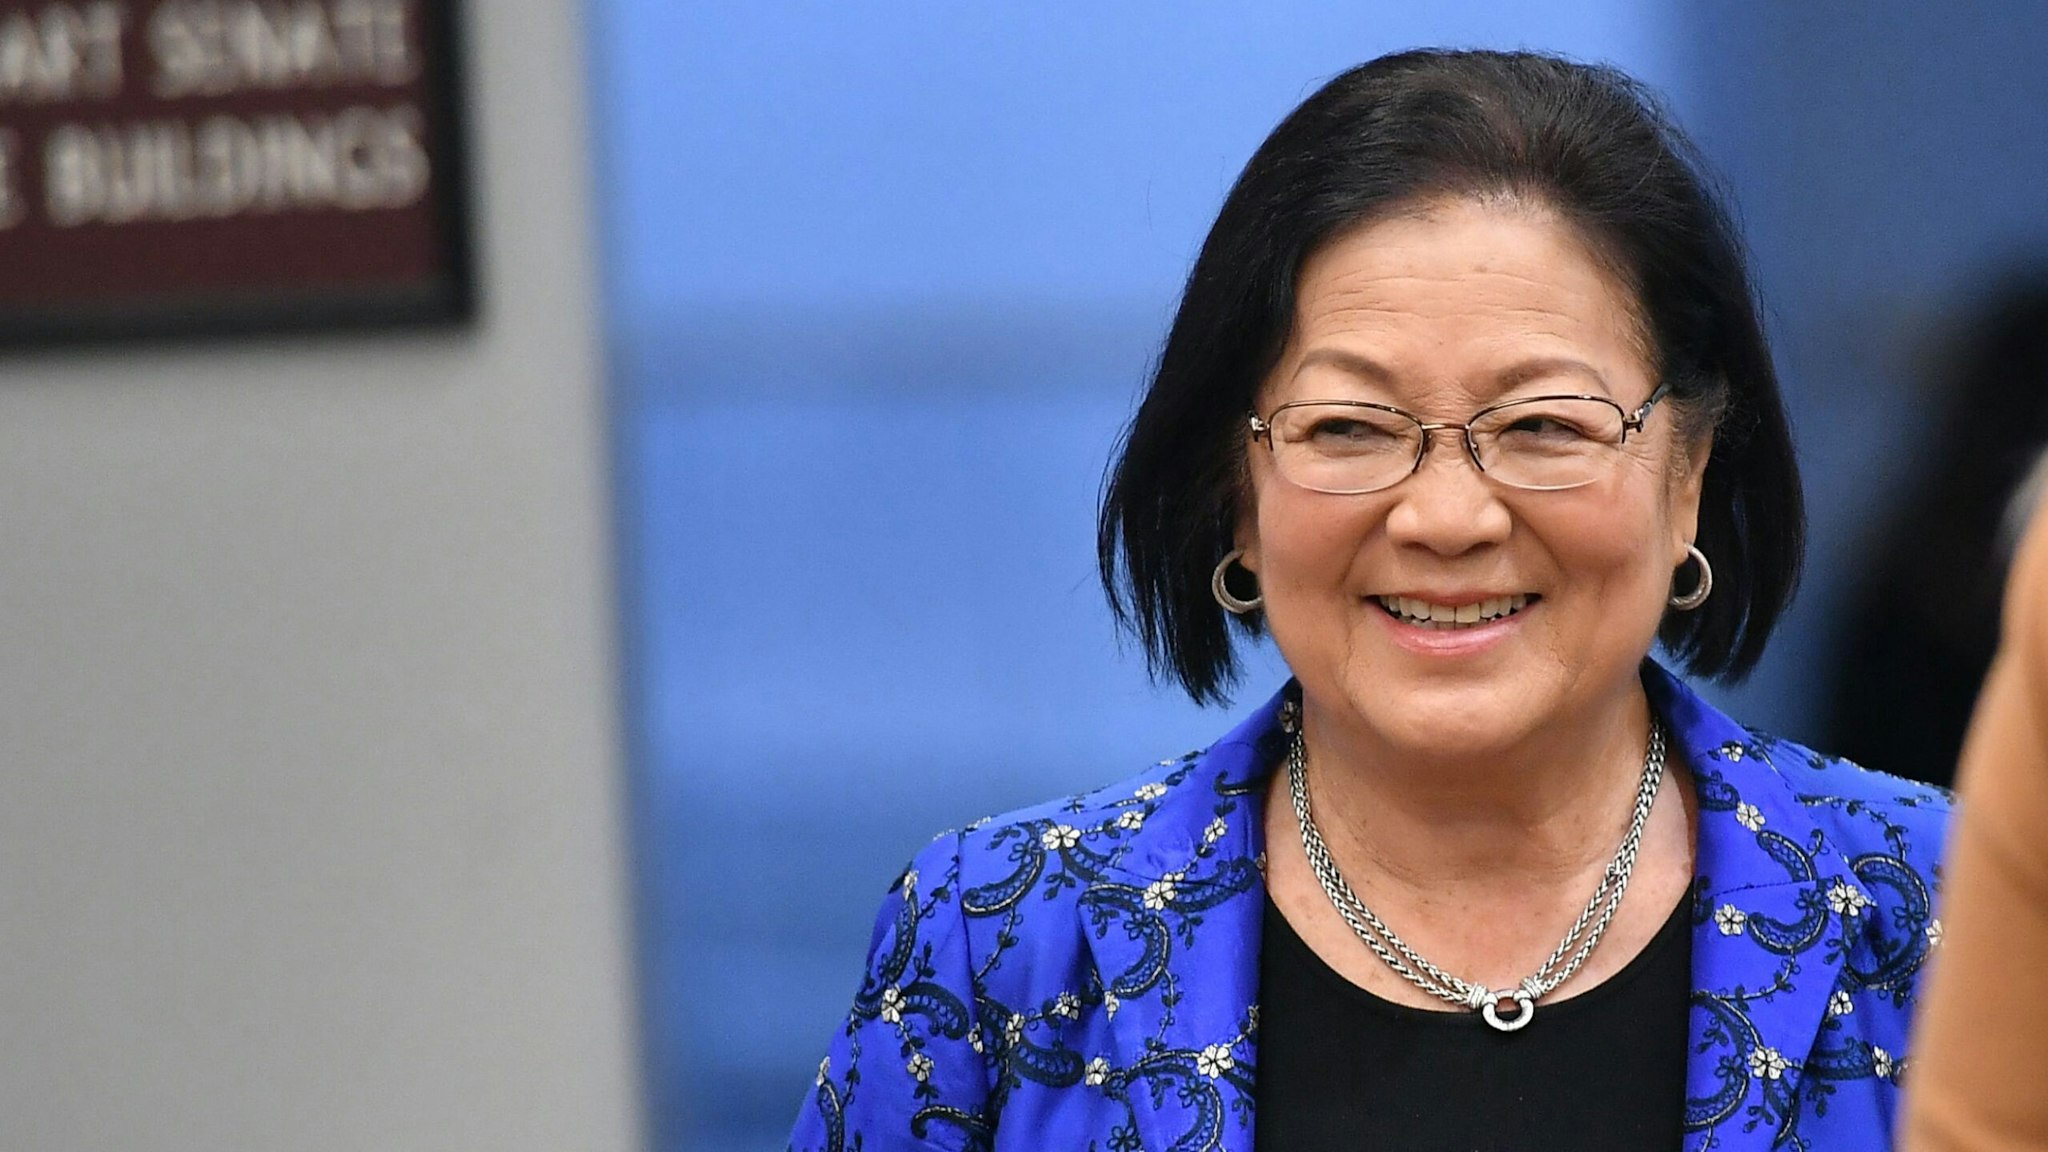 Senator Mazie Hirono(L) (D-HI) arrives during the impeachment trial of US President Donald Trump on Capitol Hill January 29, 2020, in Washington, DC. - The fight over calling witnesses to testify in President Donald Trump's impeachment trial intensified January 28, 2020 after Trump's lawyers closed their defense calling the abuse of power charges against him politically motivated. Democrats sought to have the Senate subpoena former White House national security advisor John Bolton to provide evidence after leaks from his forthcoming book suggested he could supply damning evidence against Trump.